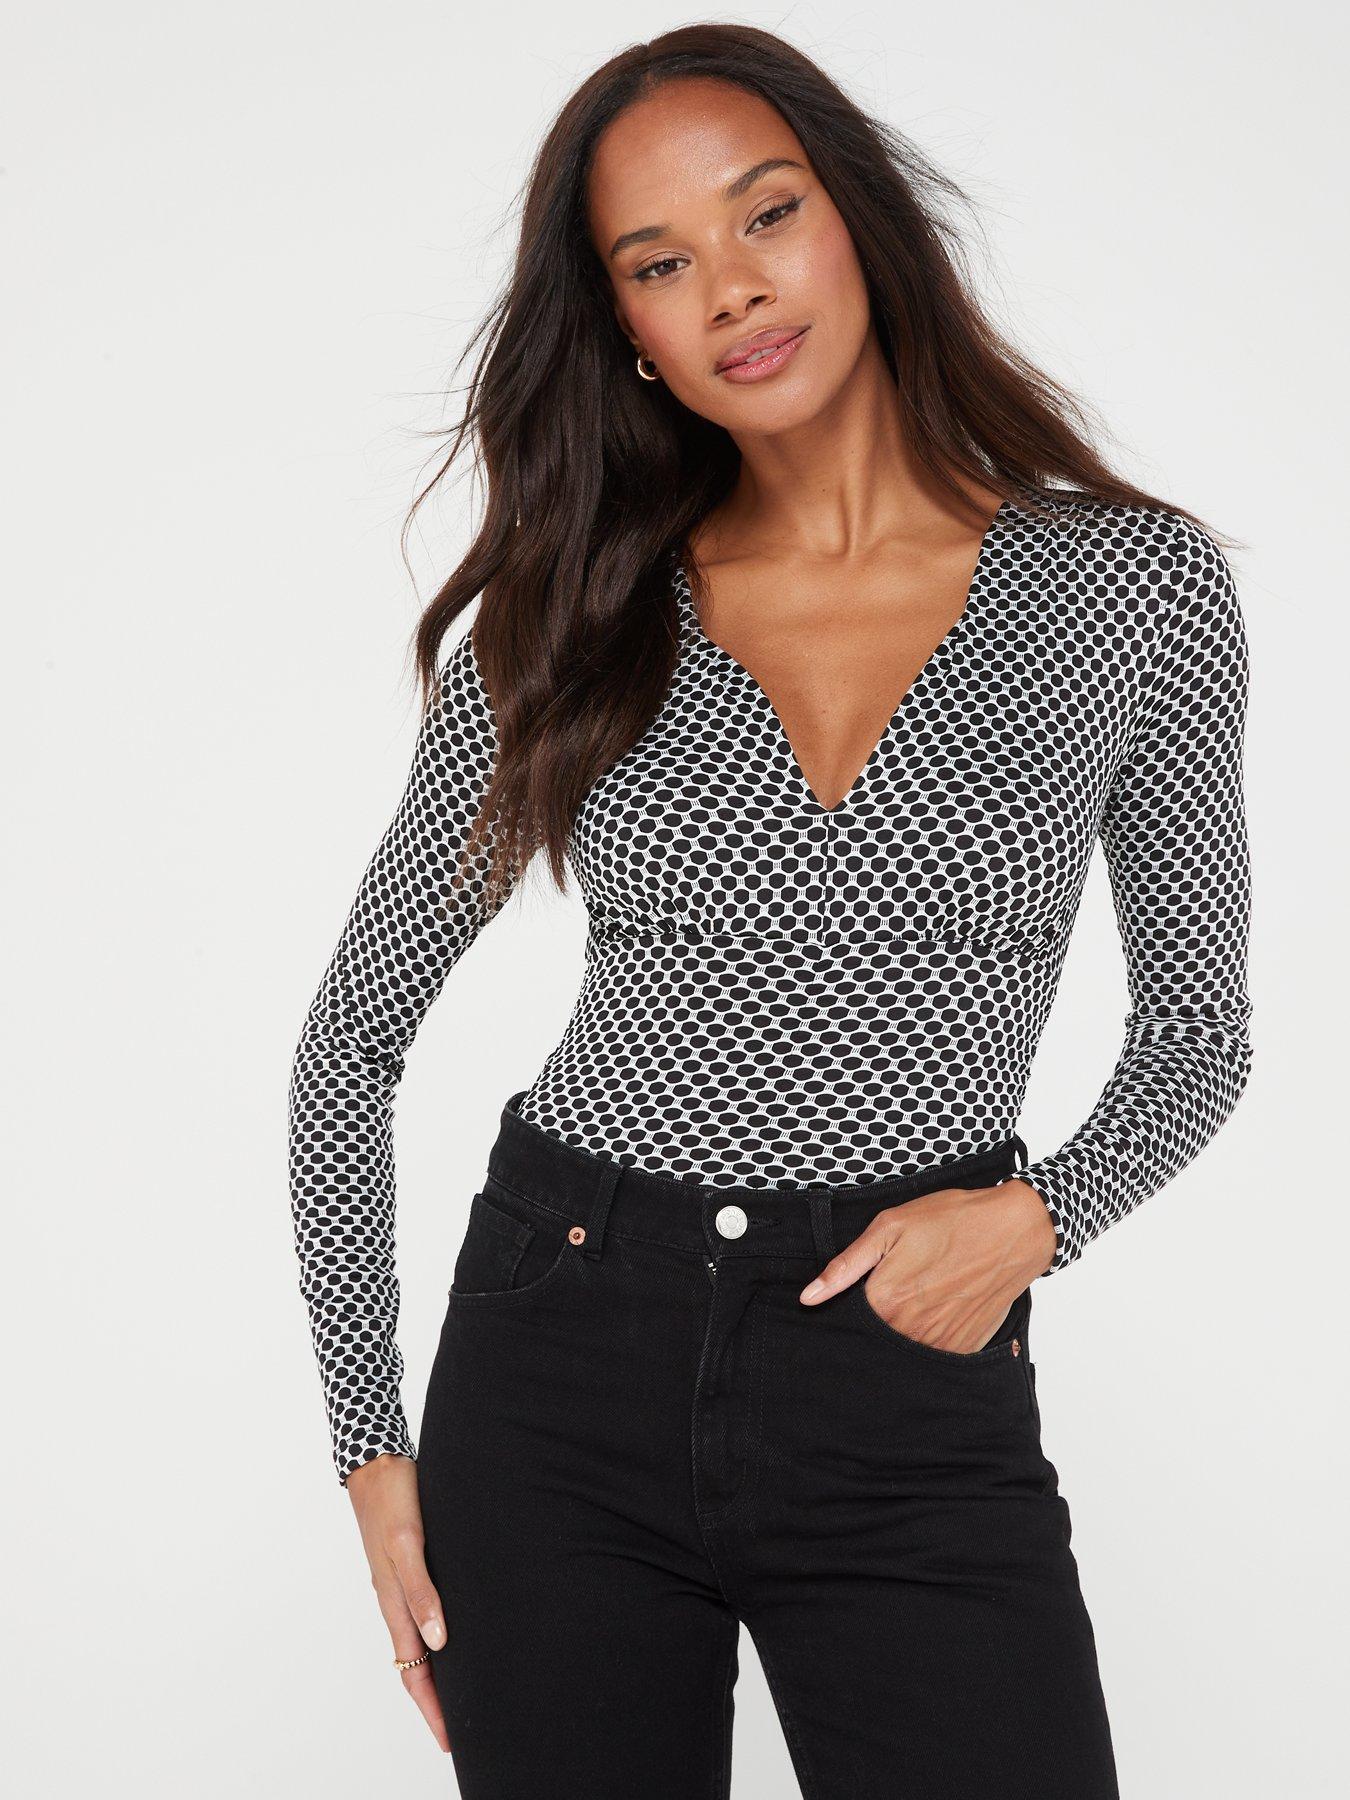 Too Much For You Long Sleeve Bodysuit - Black